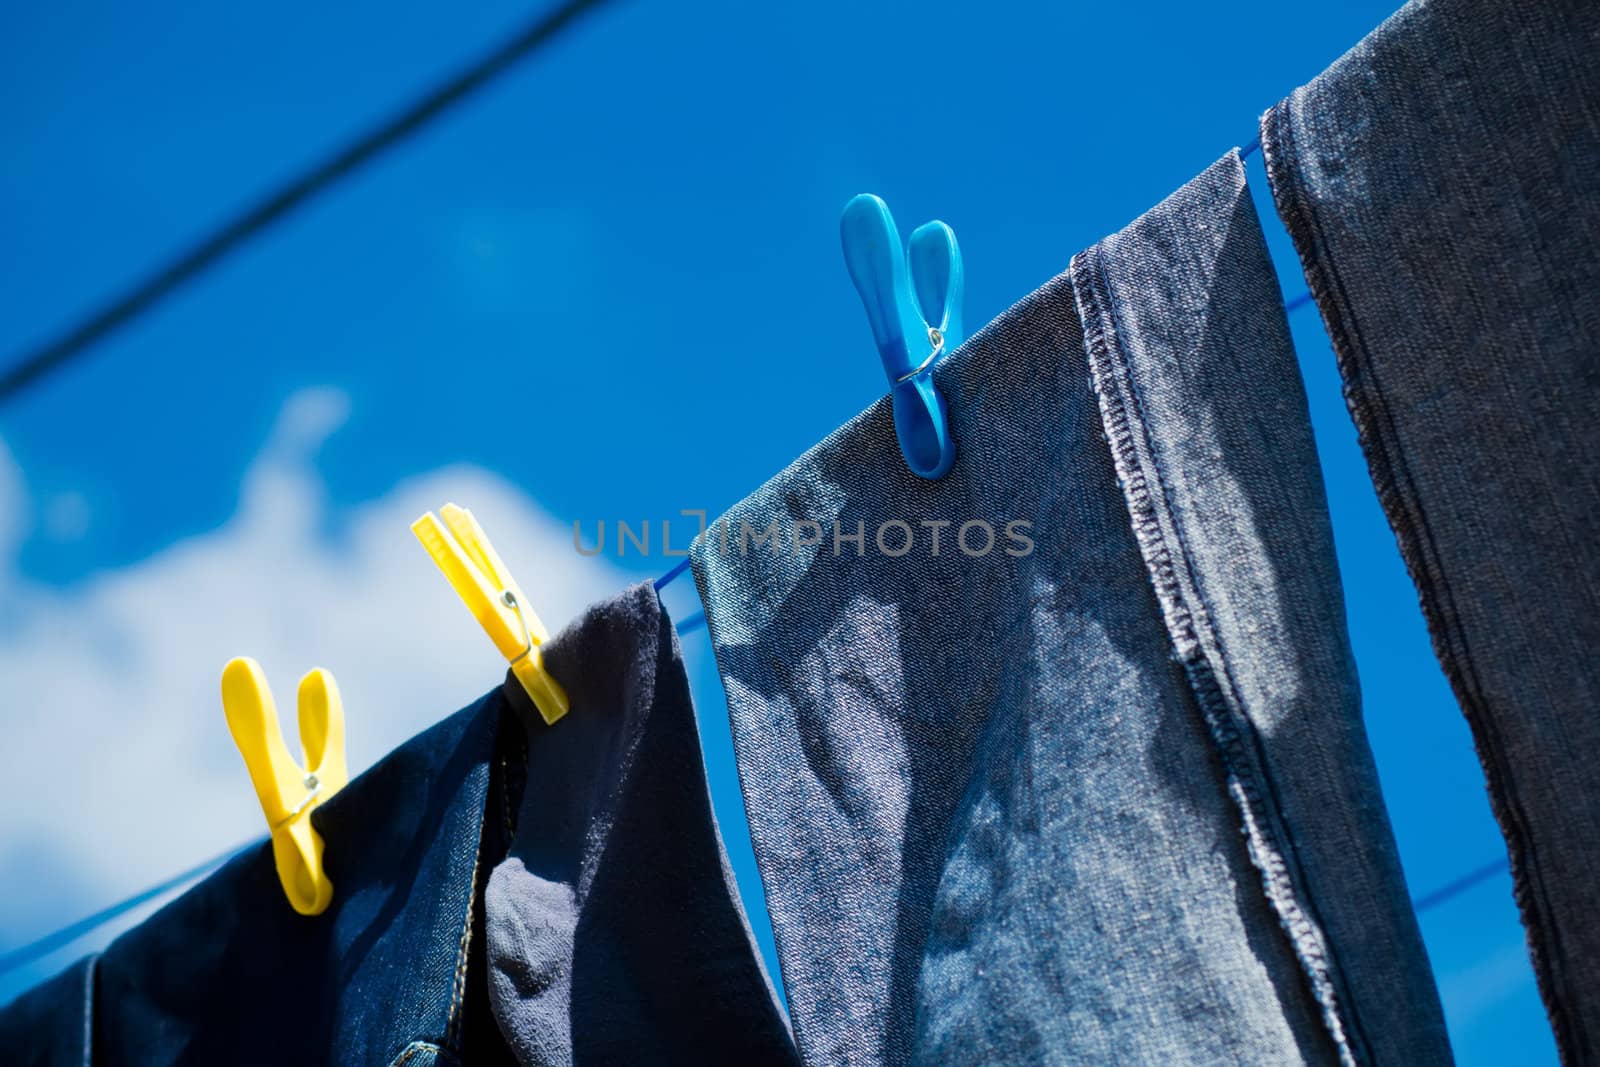 Washed blue jeans drying outside under blue sky